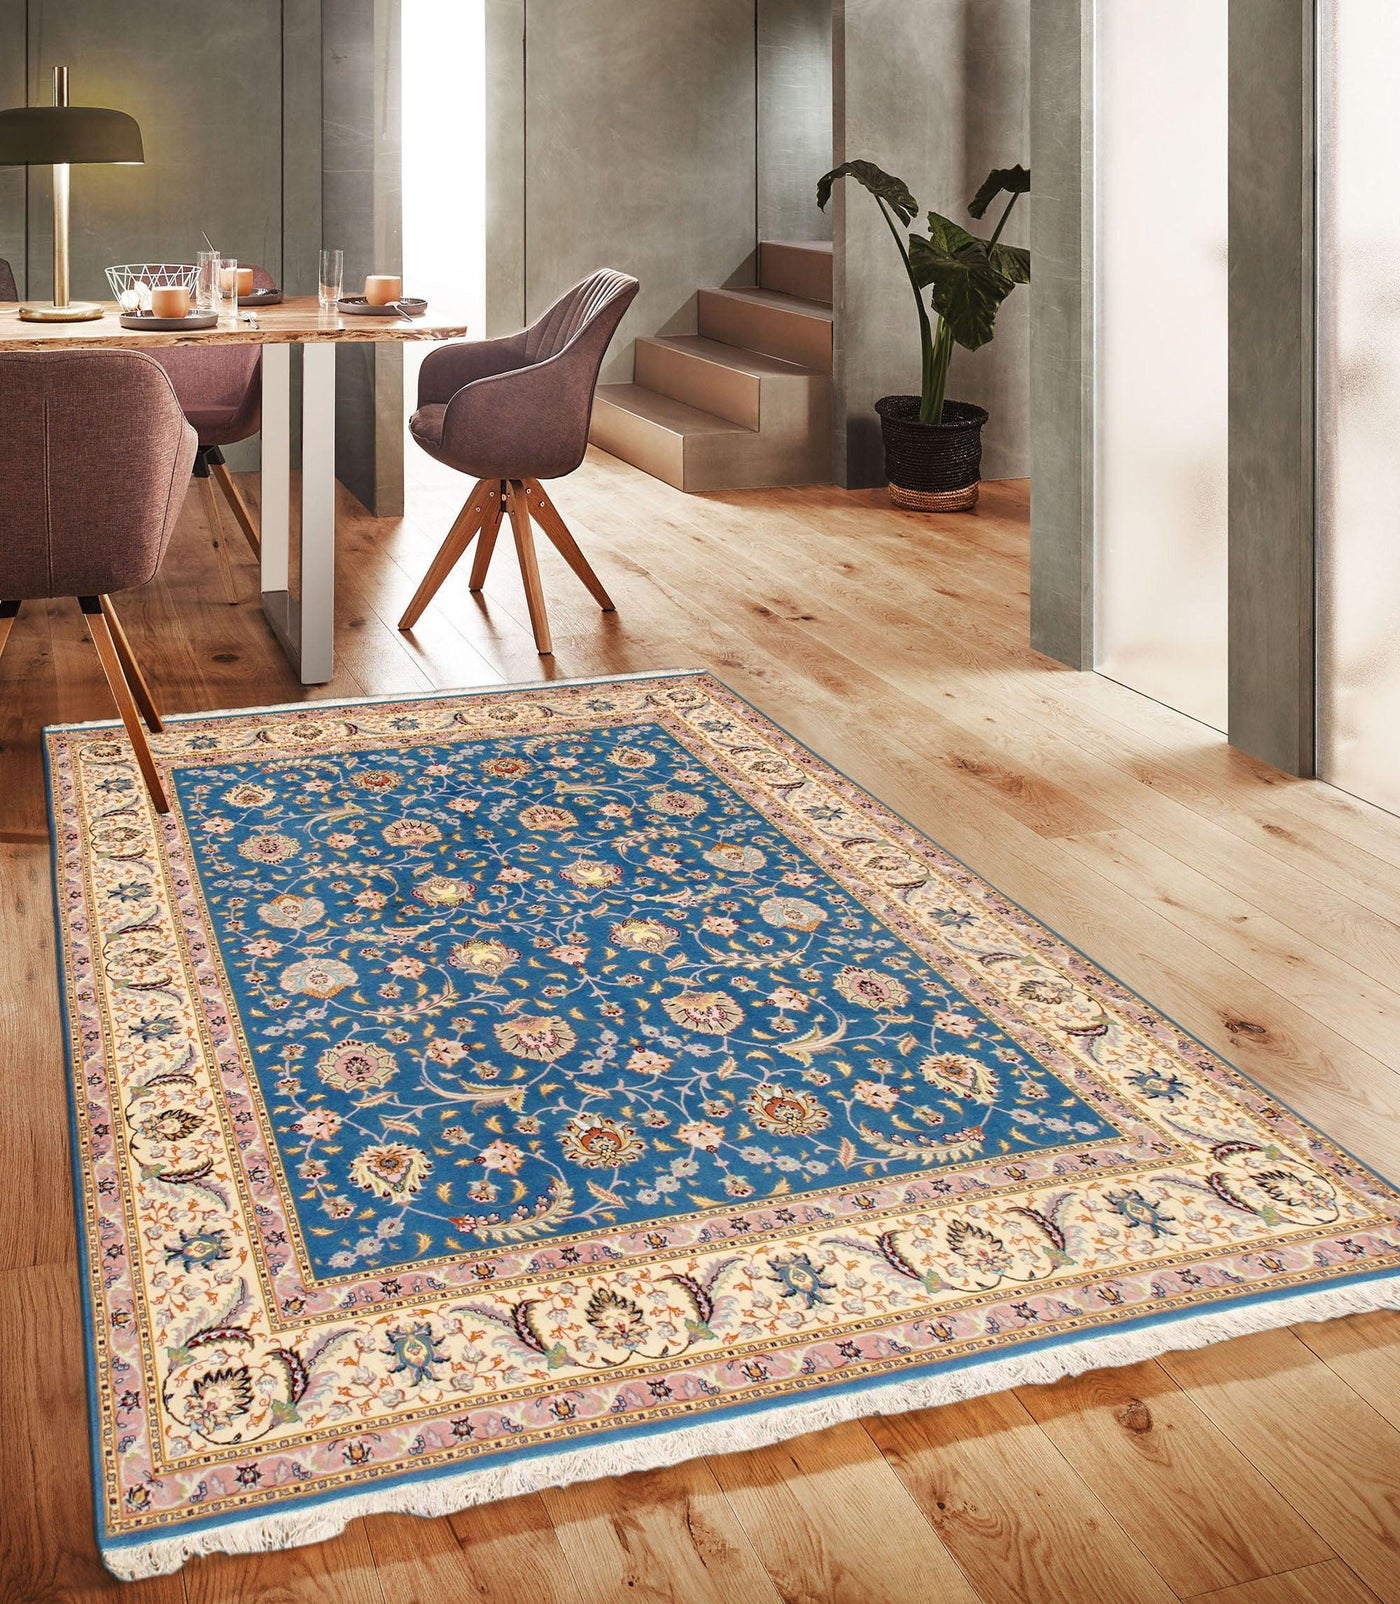 Canvello Persian Tabriz Blue Wool Area Rugs - 6'7" X 8'6"